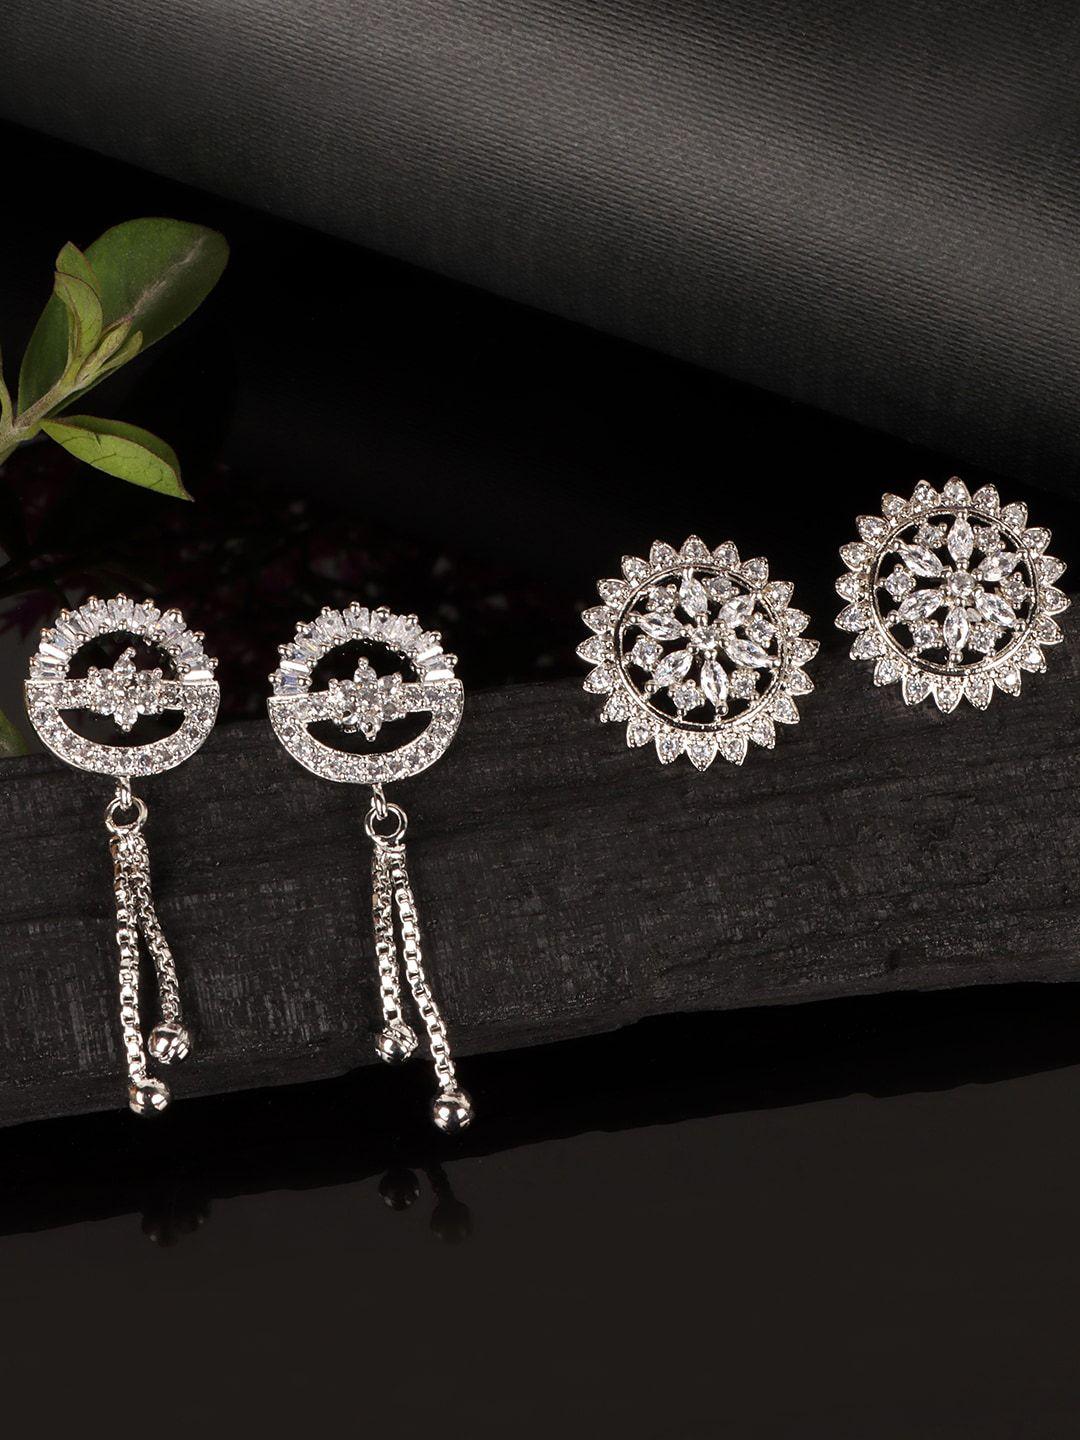 jewels gehna set of 2 silver-toned contemporary studs earrings